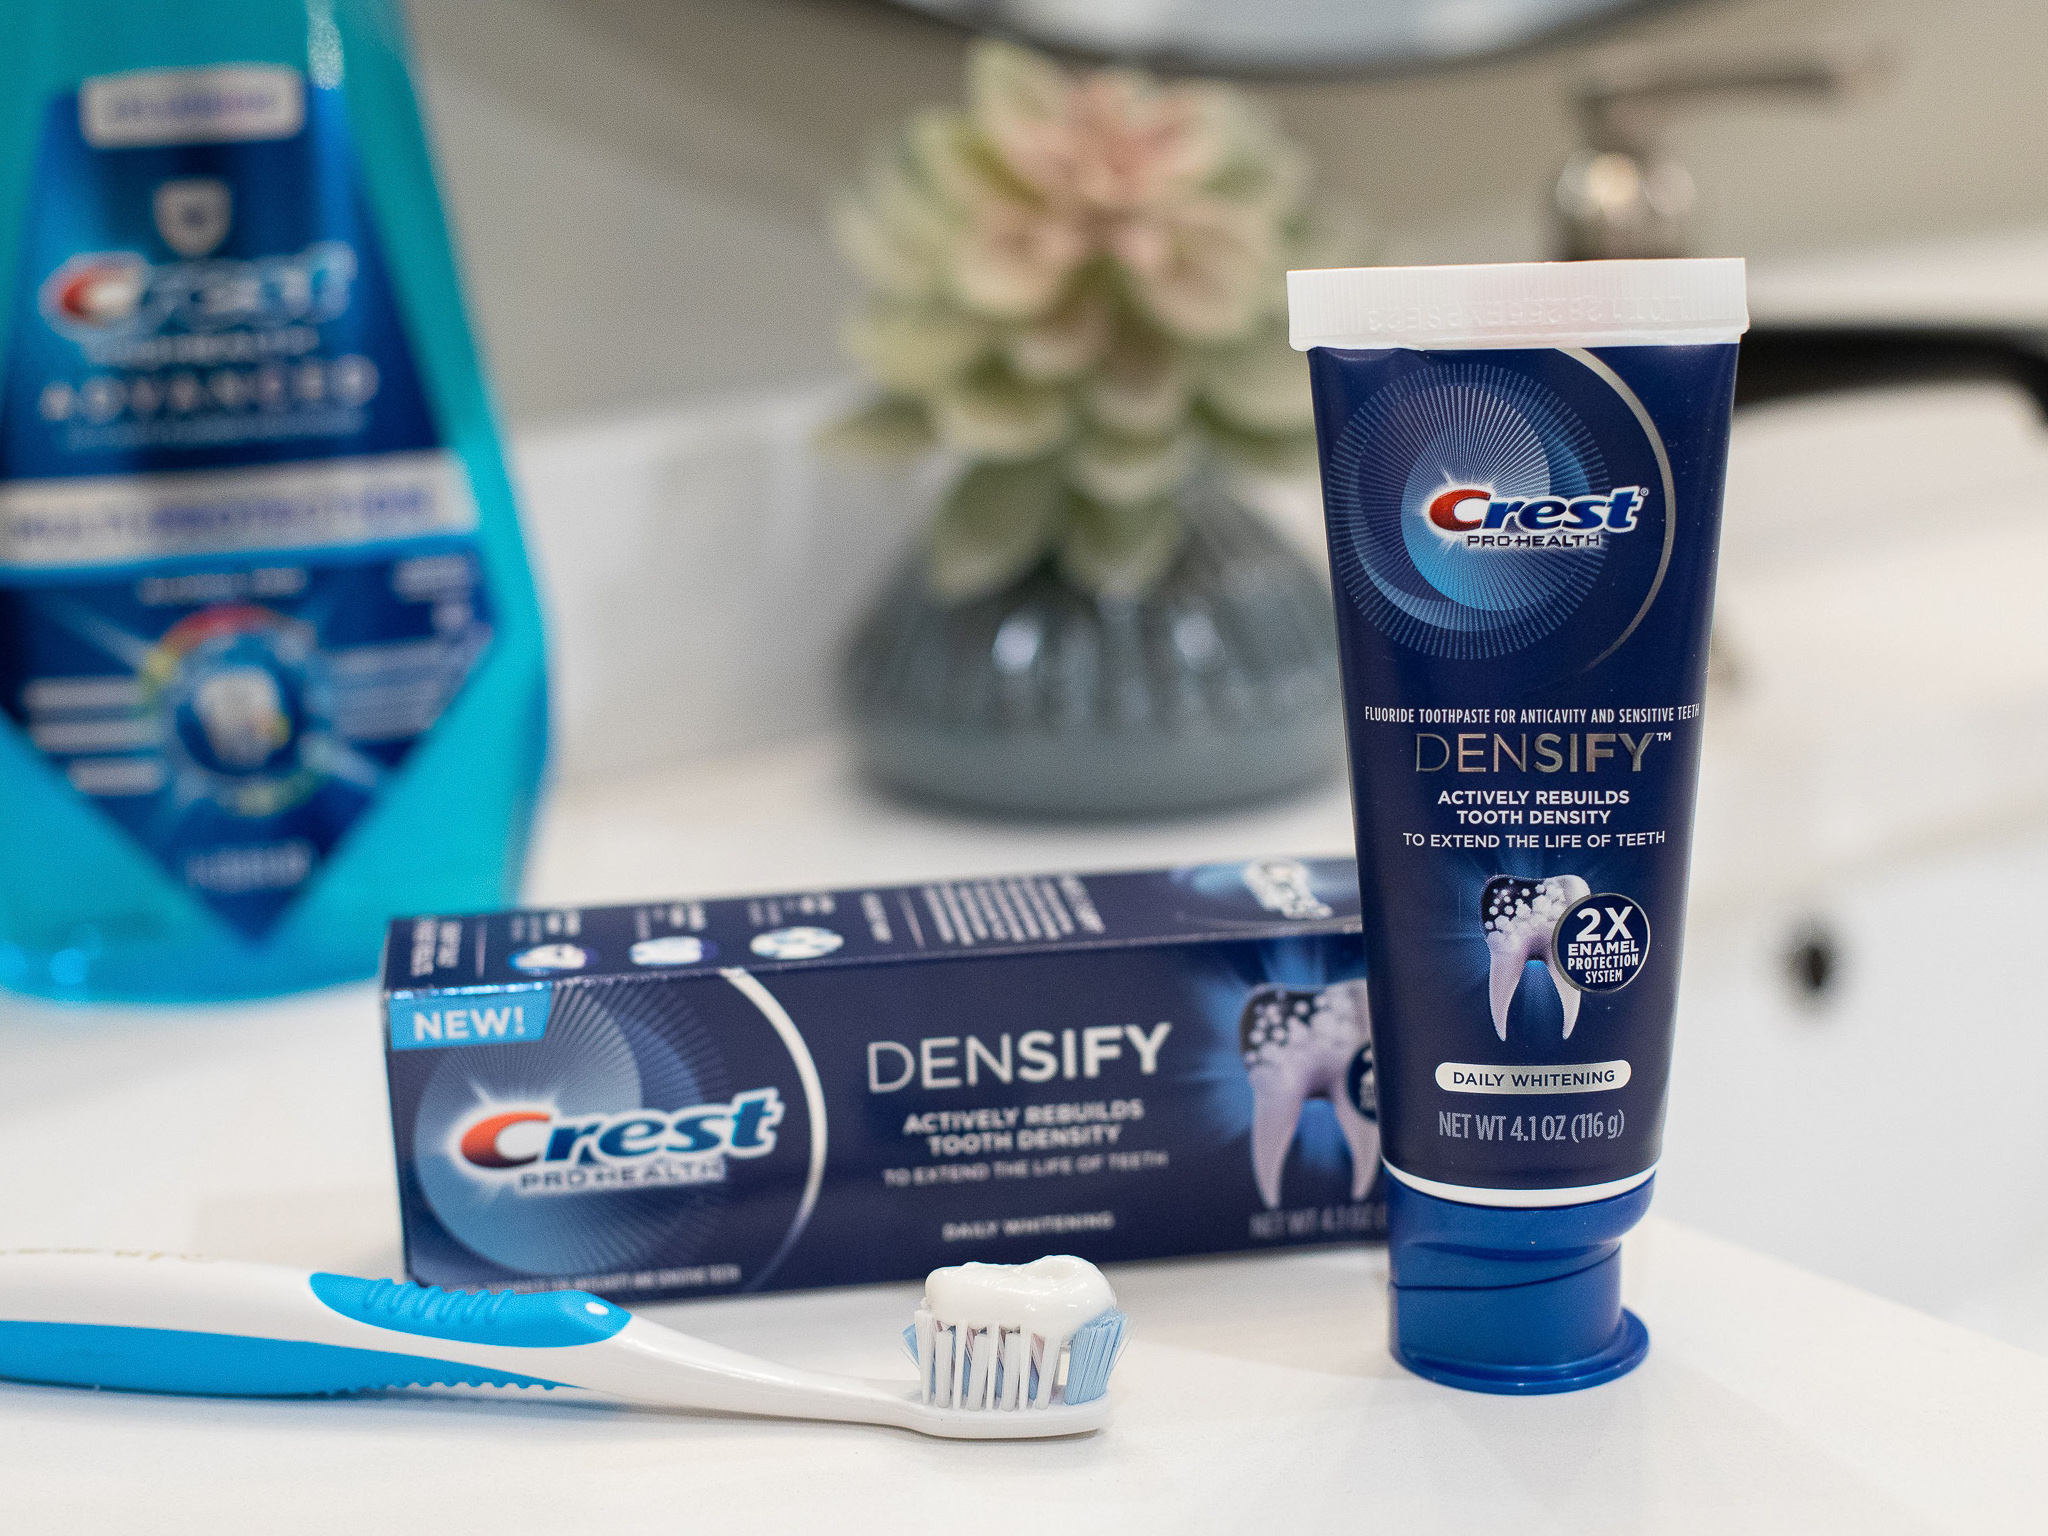 Select Crest Toothpaste As Low As 99¢ At Kroger